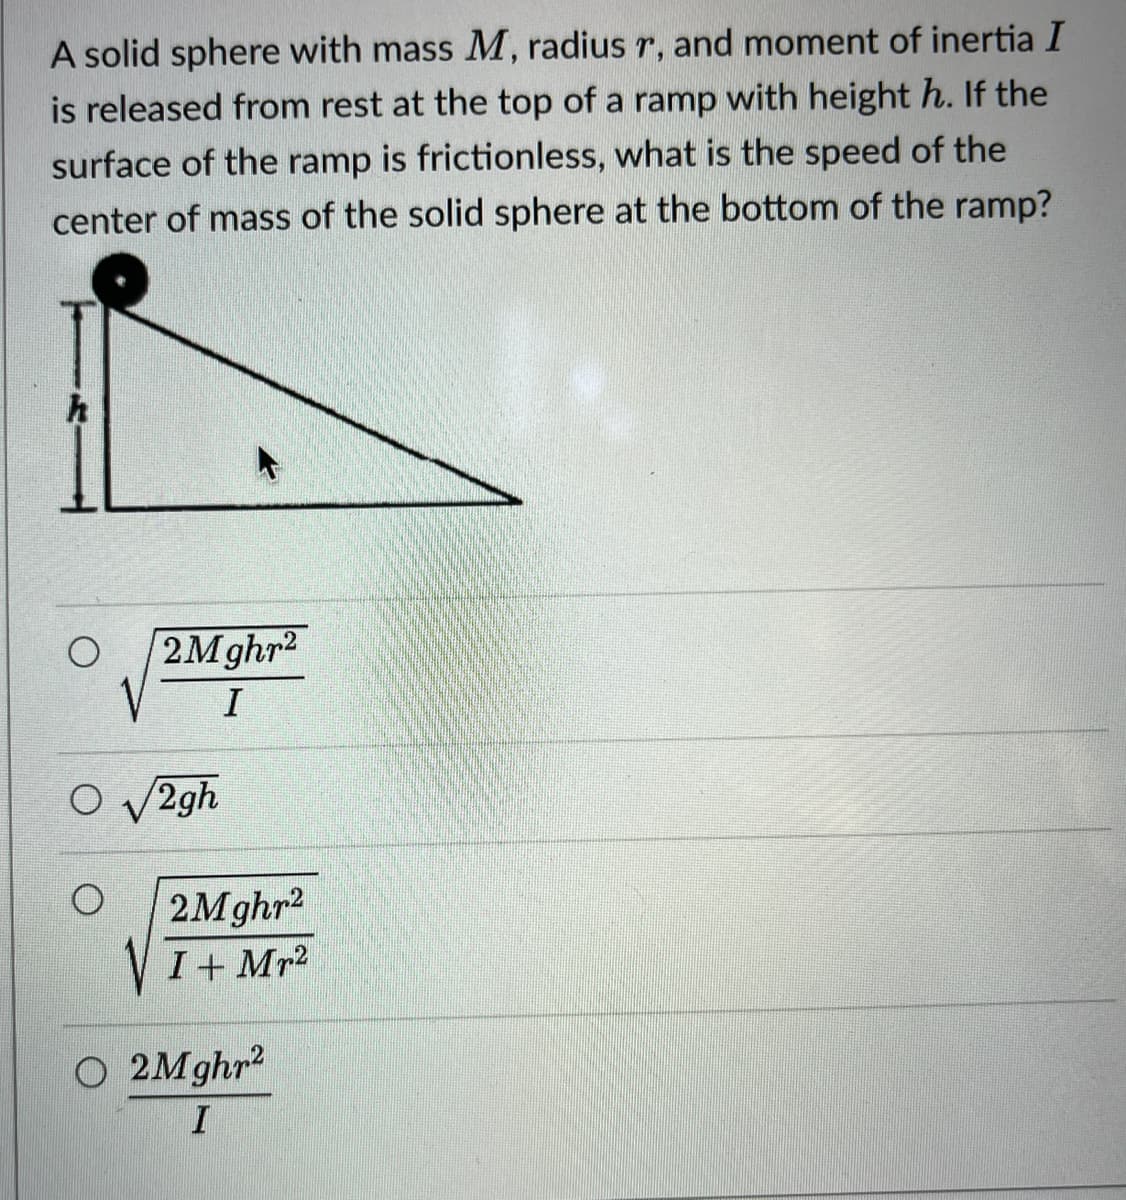 A solid sphere with mass M, radius r, and moment of inertia I
is released from rest at the top of a ramp with height h. If the
surface of the ramp is frictionless, what is the speed of the
center of mass of the solid sphere at the bottom of the ramp?
h
2Mghr2
I
O√2gh
O
O 2Mghr²
I
2Mghr²
I + Mr²